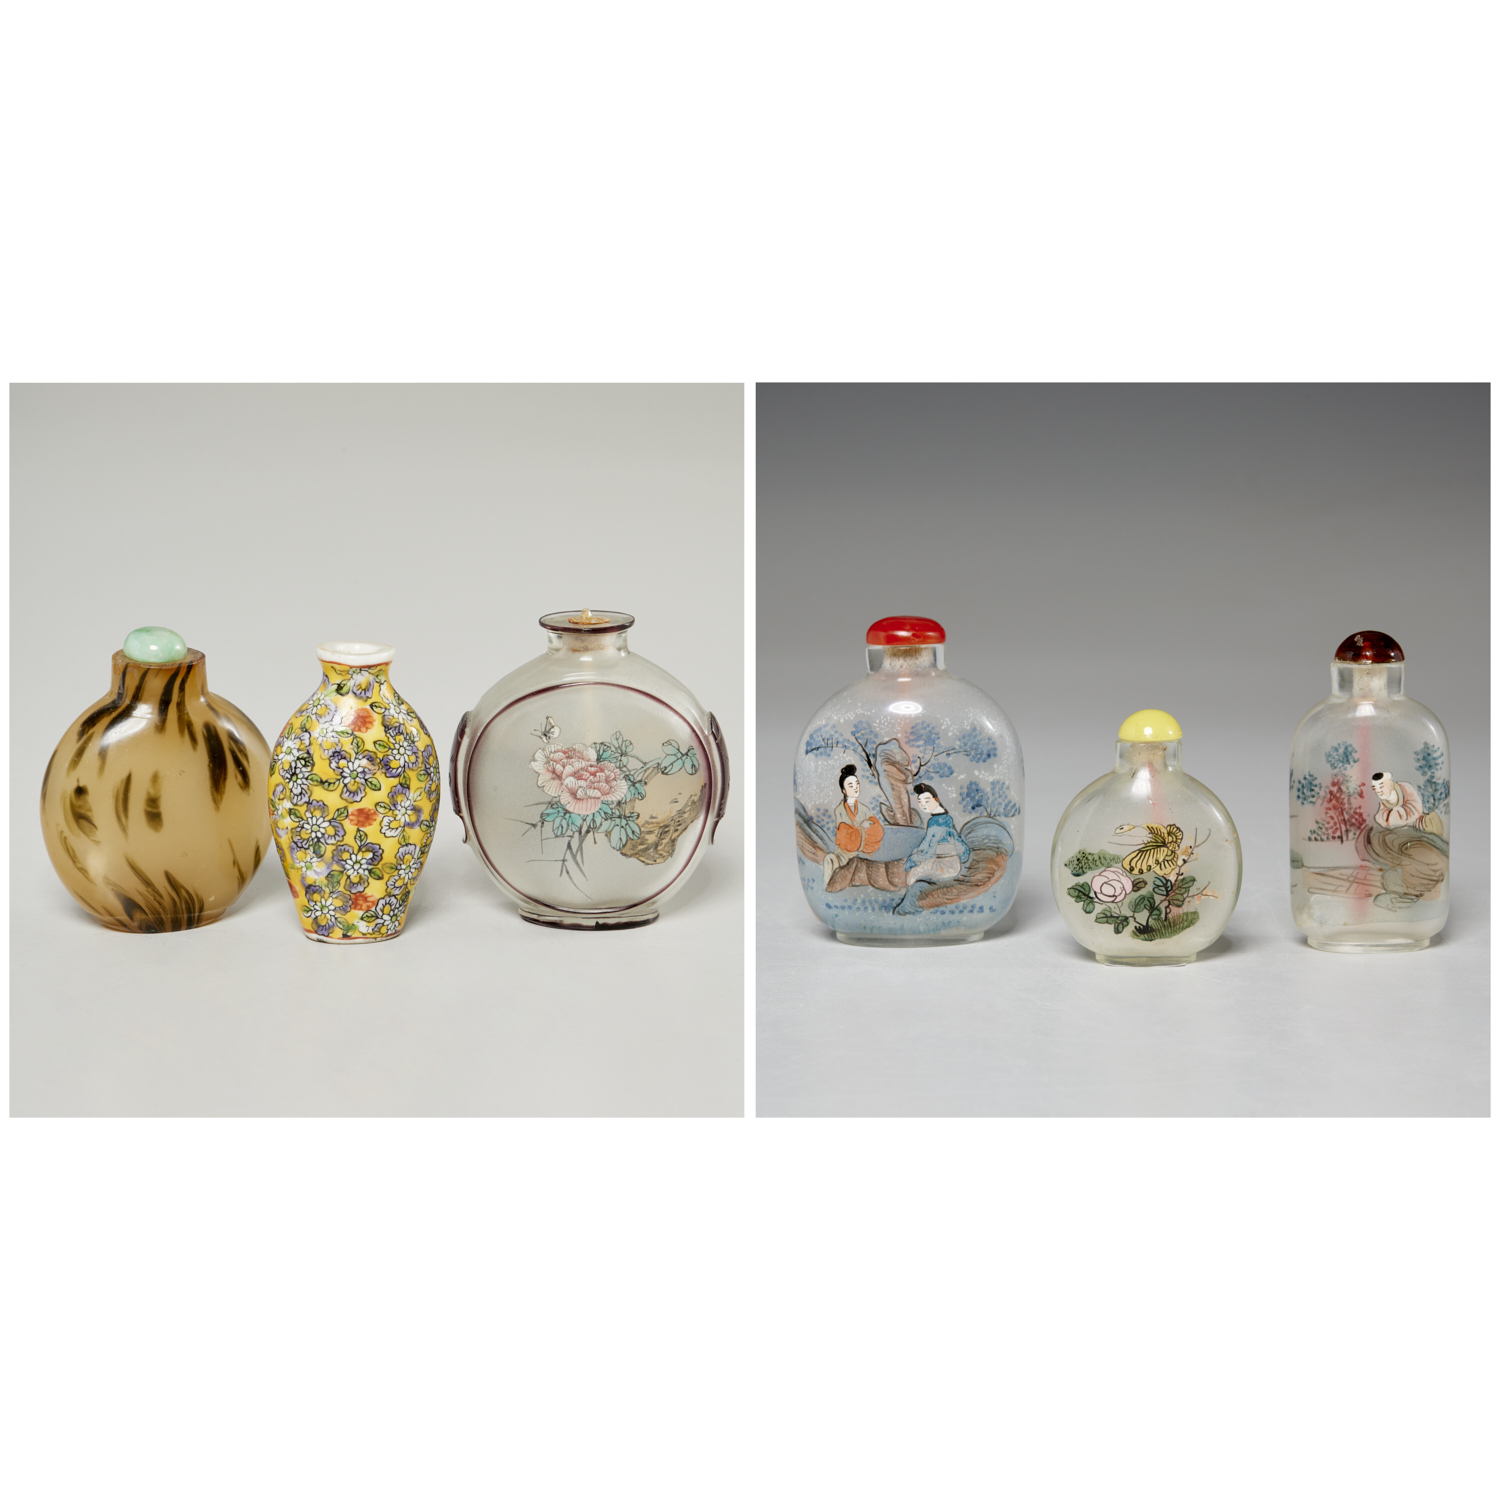  6 CHINESE SNUFF BOTTLES Likely 361179